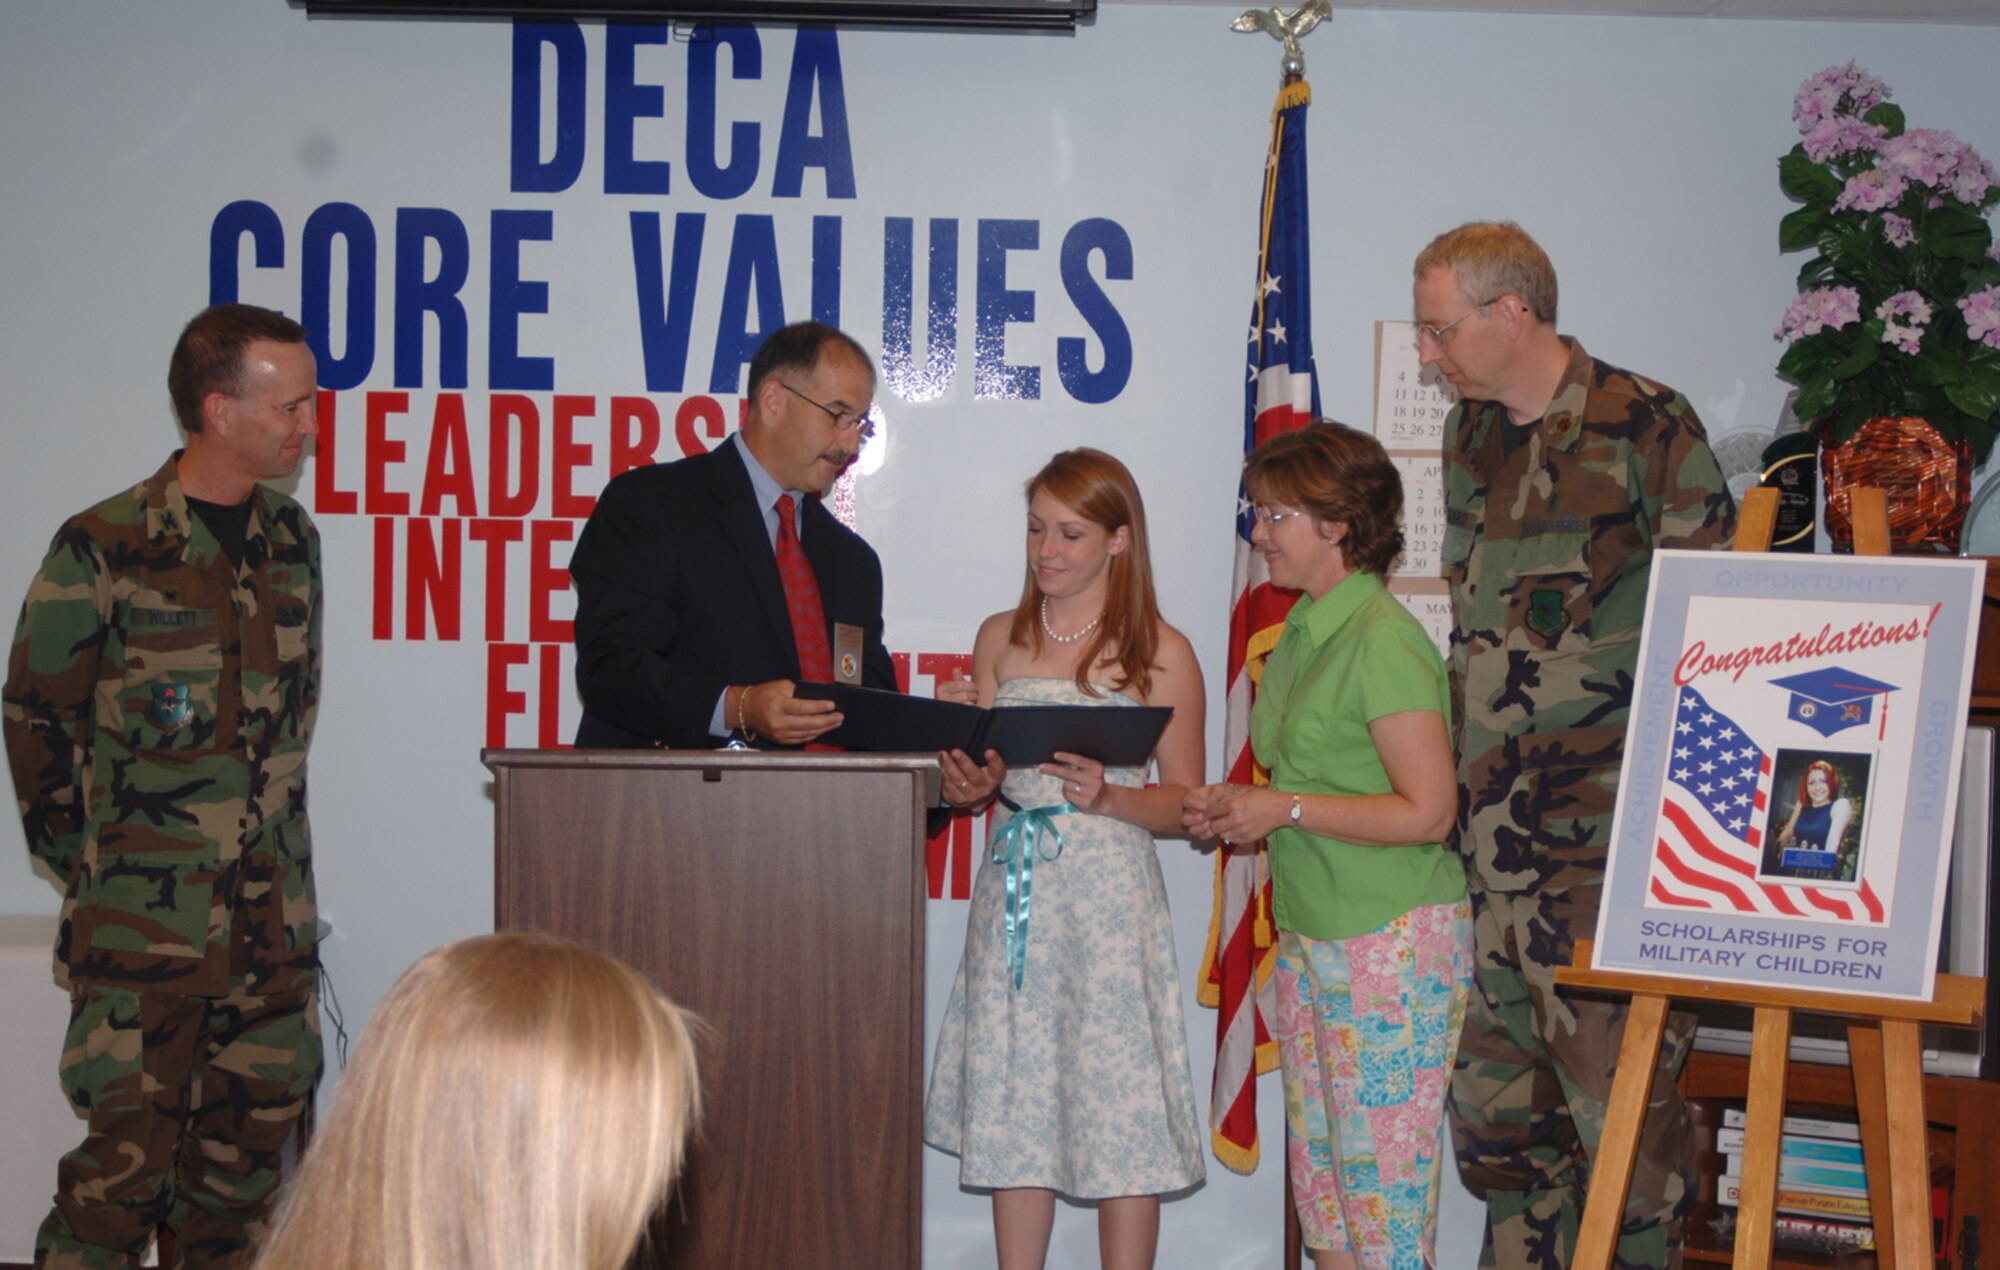 April Taylor, daughter of Maj. William Hubbard, was awarded the Defense Commissary Agency Scholarship for Military Children Tuesday. She is pictured here with Colonel Eugene Willett, 14th Mission Support Group commander, Keith Laughinghouse, CAFB DeCA representative, and her parents, Maj. and Mrs. Hubbard. Ms. Taylor is a senior at  Lipscomb University in Nashville, Tenn., where she is majoring in social work. (U.S. Air Force Photo/Airman 1st Class Danielle Powell)